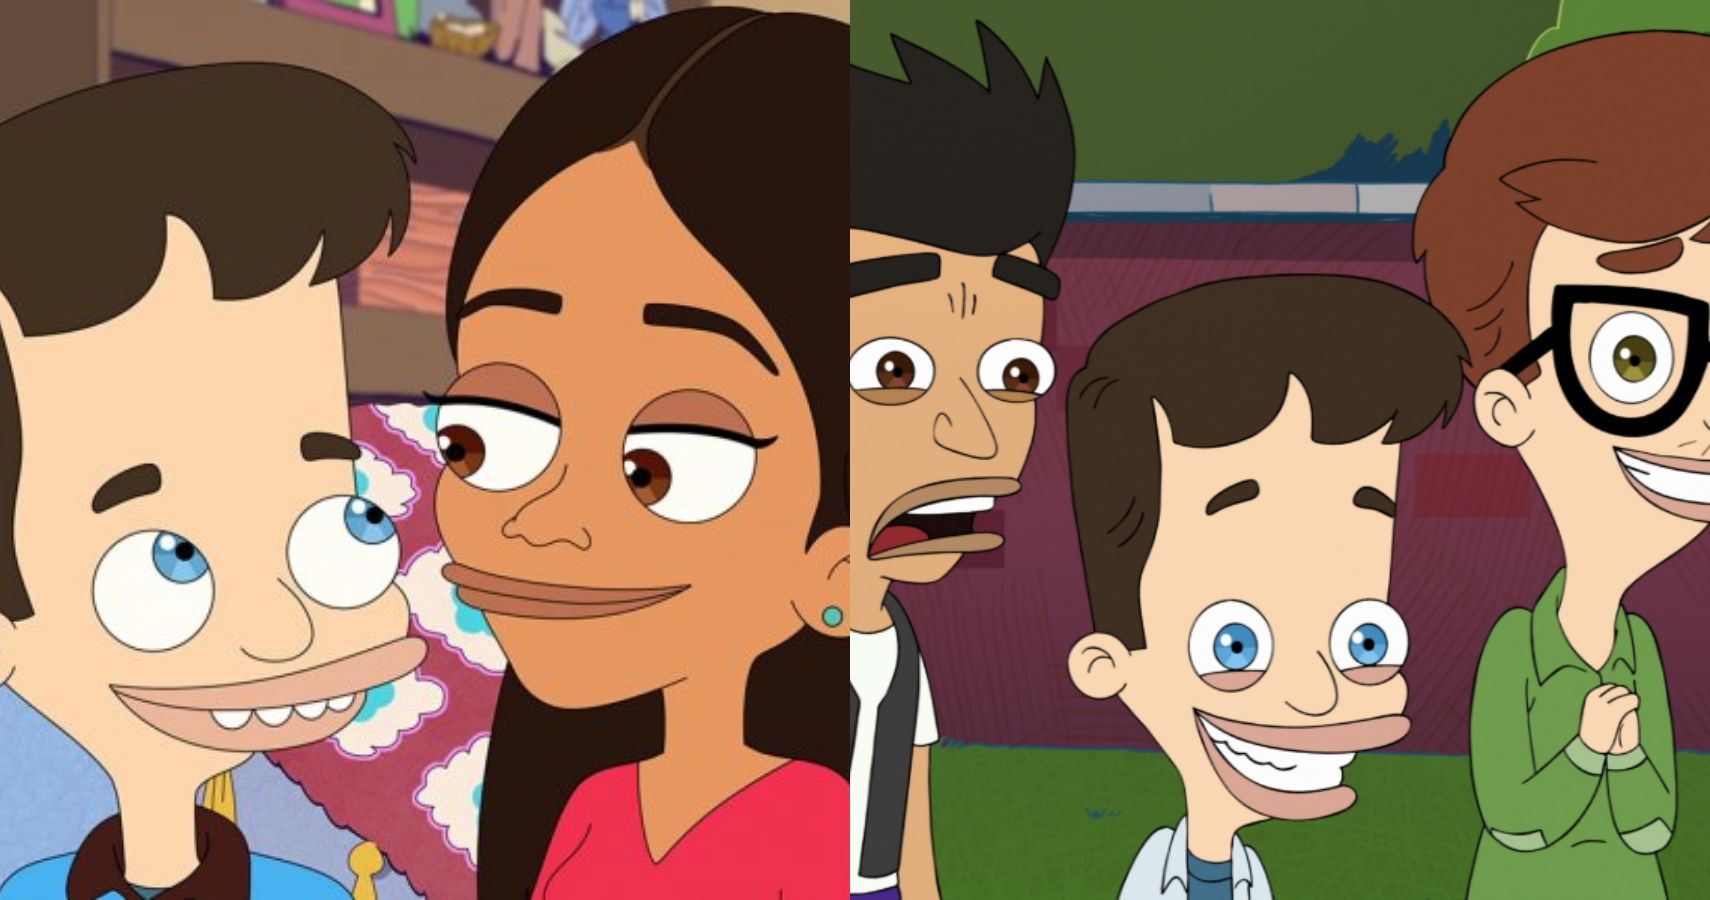 Split image of scenes from Big Mouth